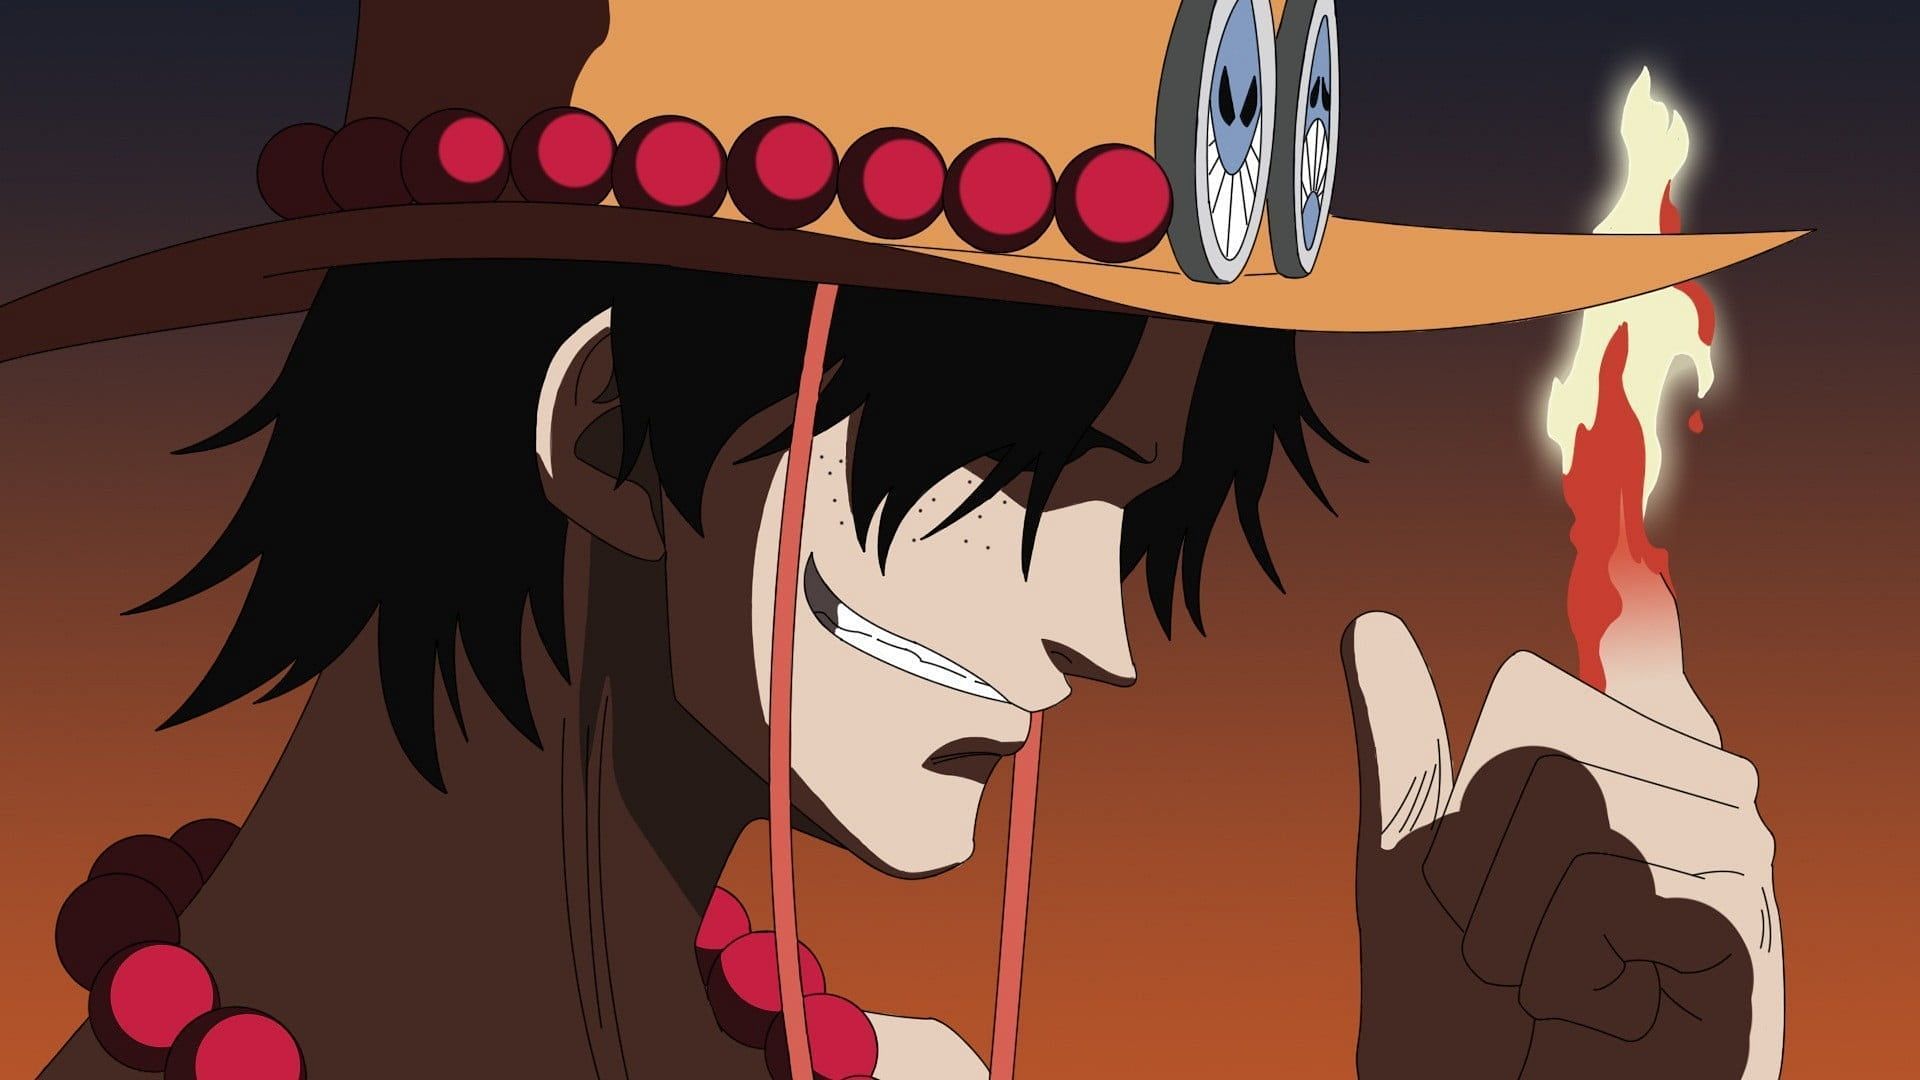 Portgas D. Ace as seen in the One Piece anime (Image via Toei Animation)